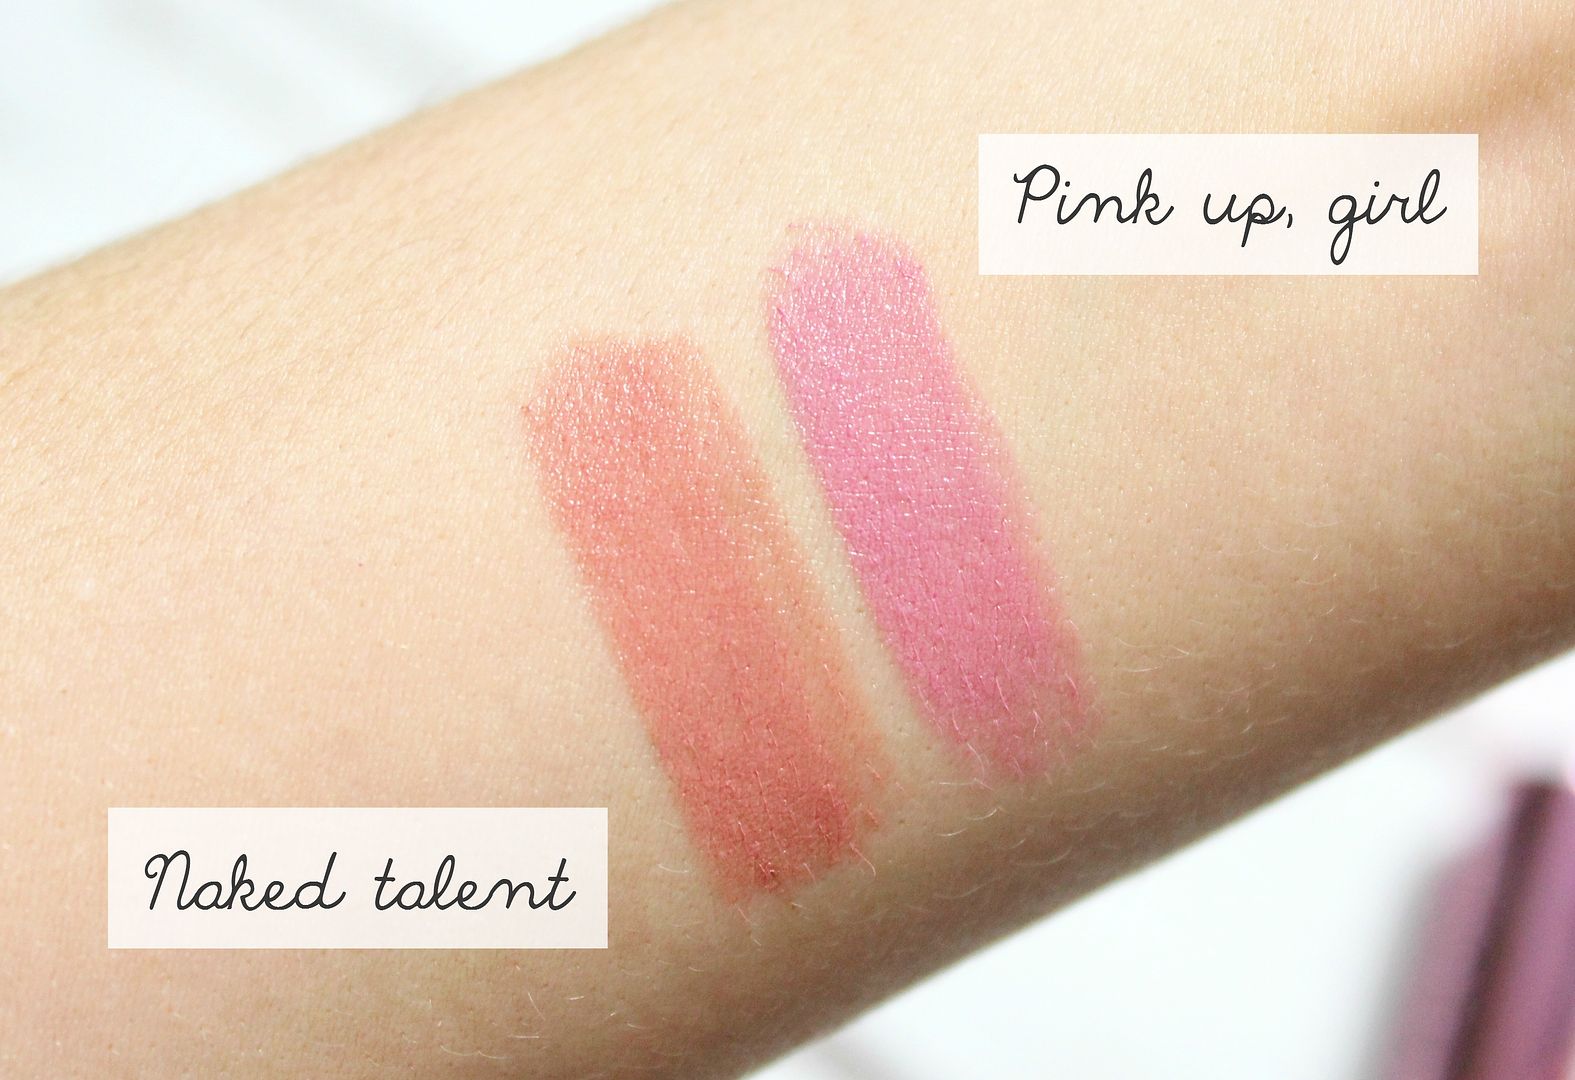 New Soap And Glory Sexy Mother Pucker Lipsticks Nude Pink Naked Talent Pink Up Girl Review Swatch Belle-Amie UK Beauty Fashion Lifestyle Blog